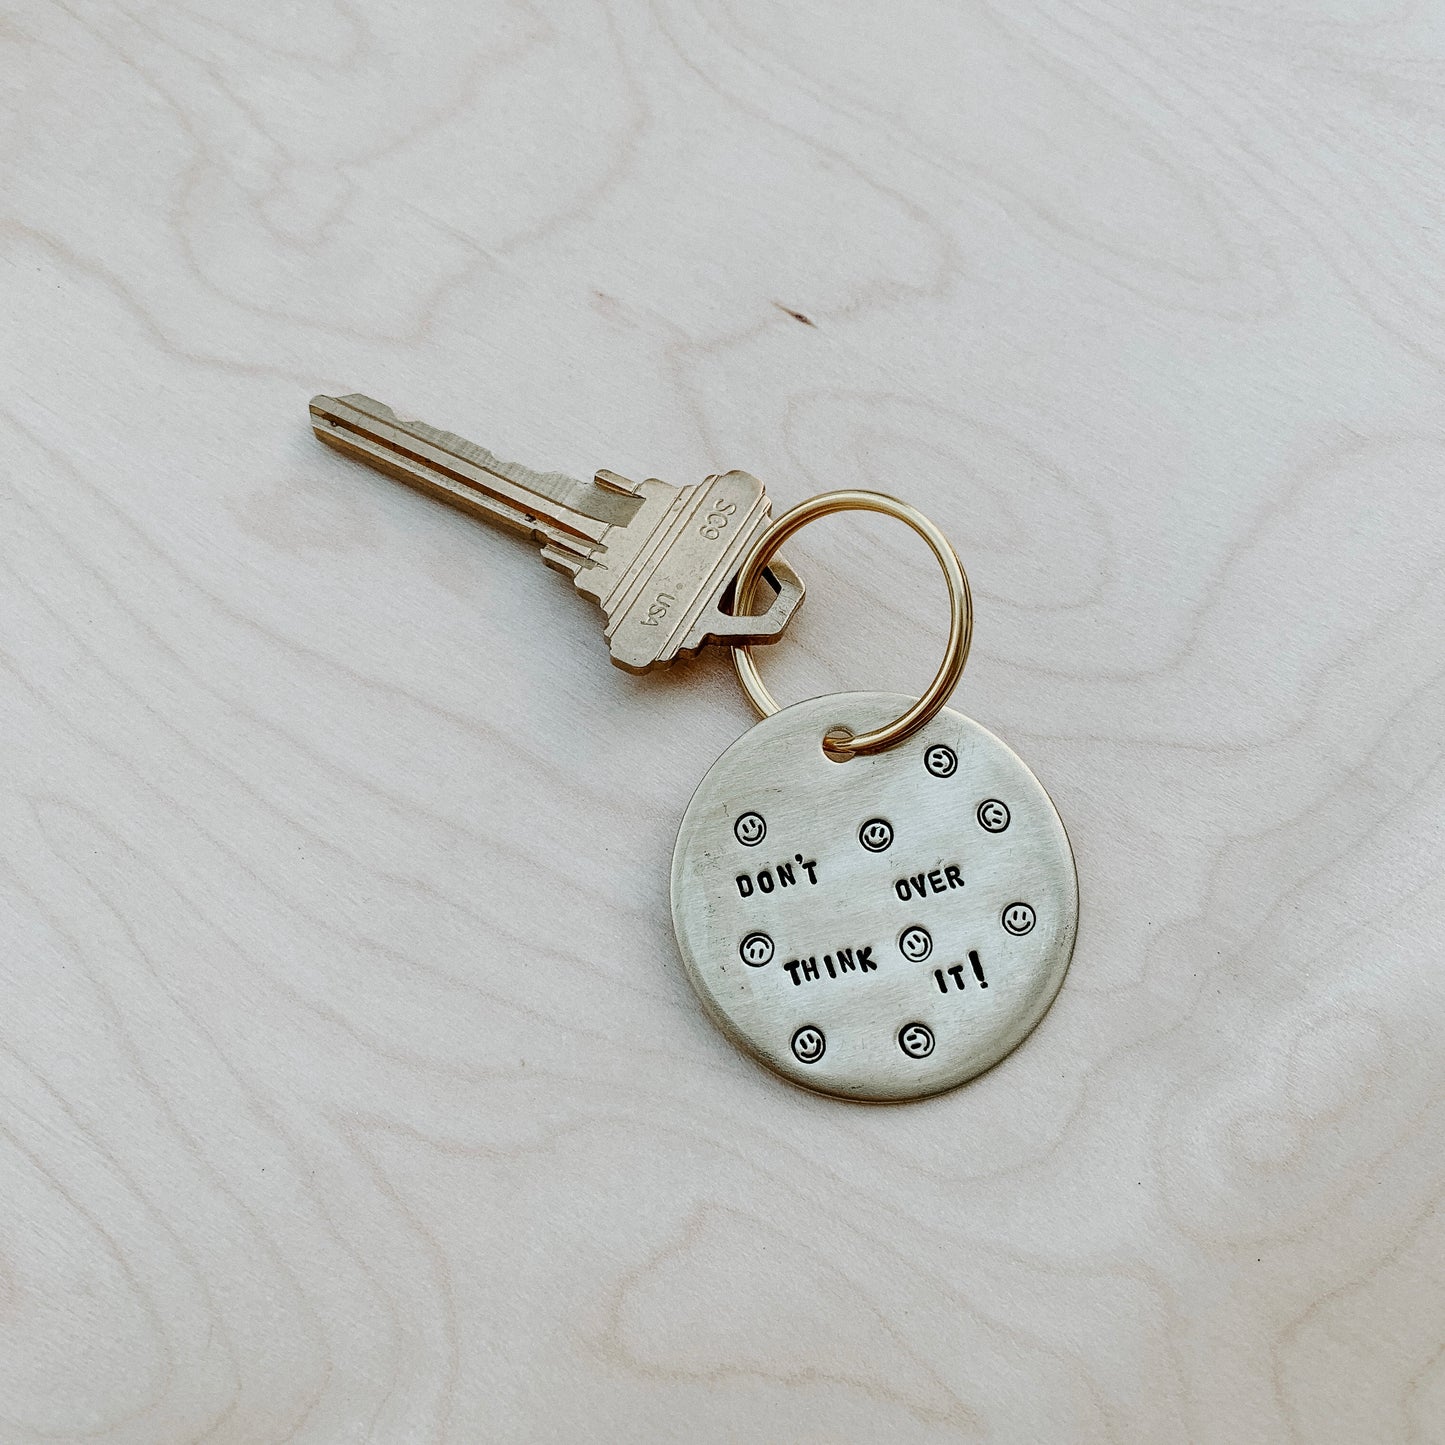 Don't Over Think It :) / Large Brass Key Tag